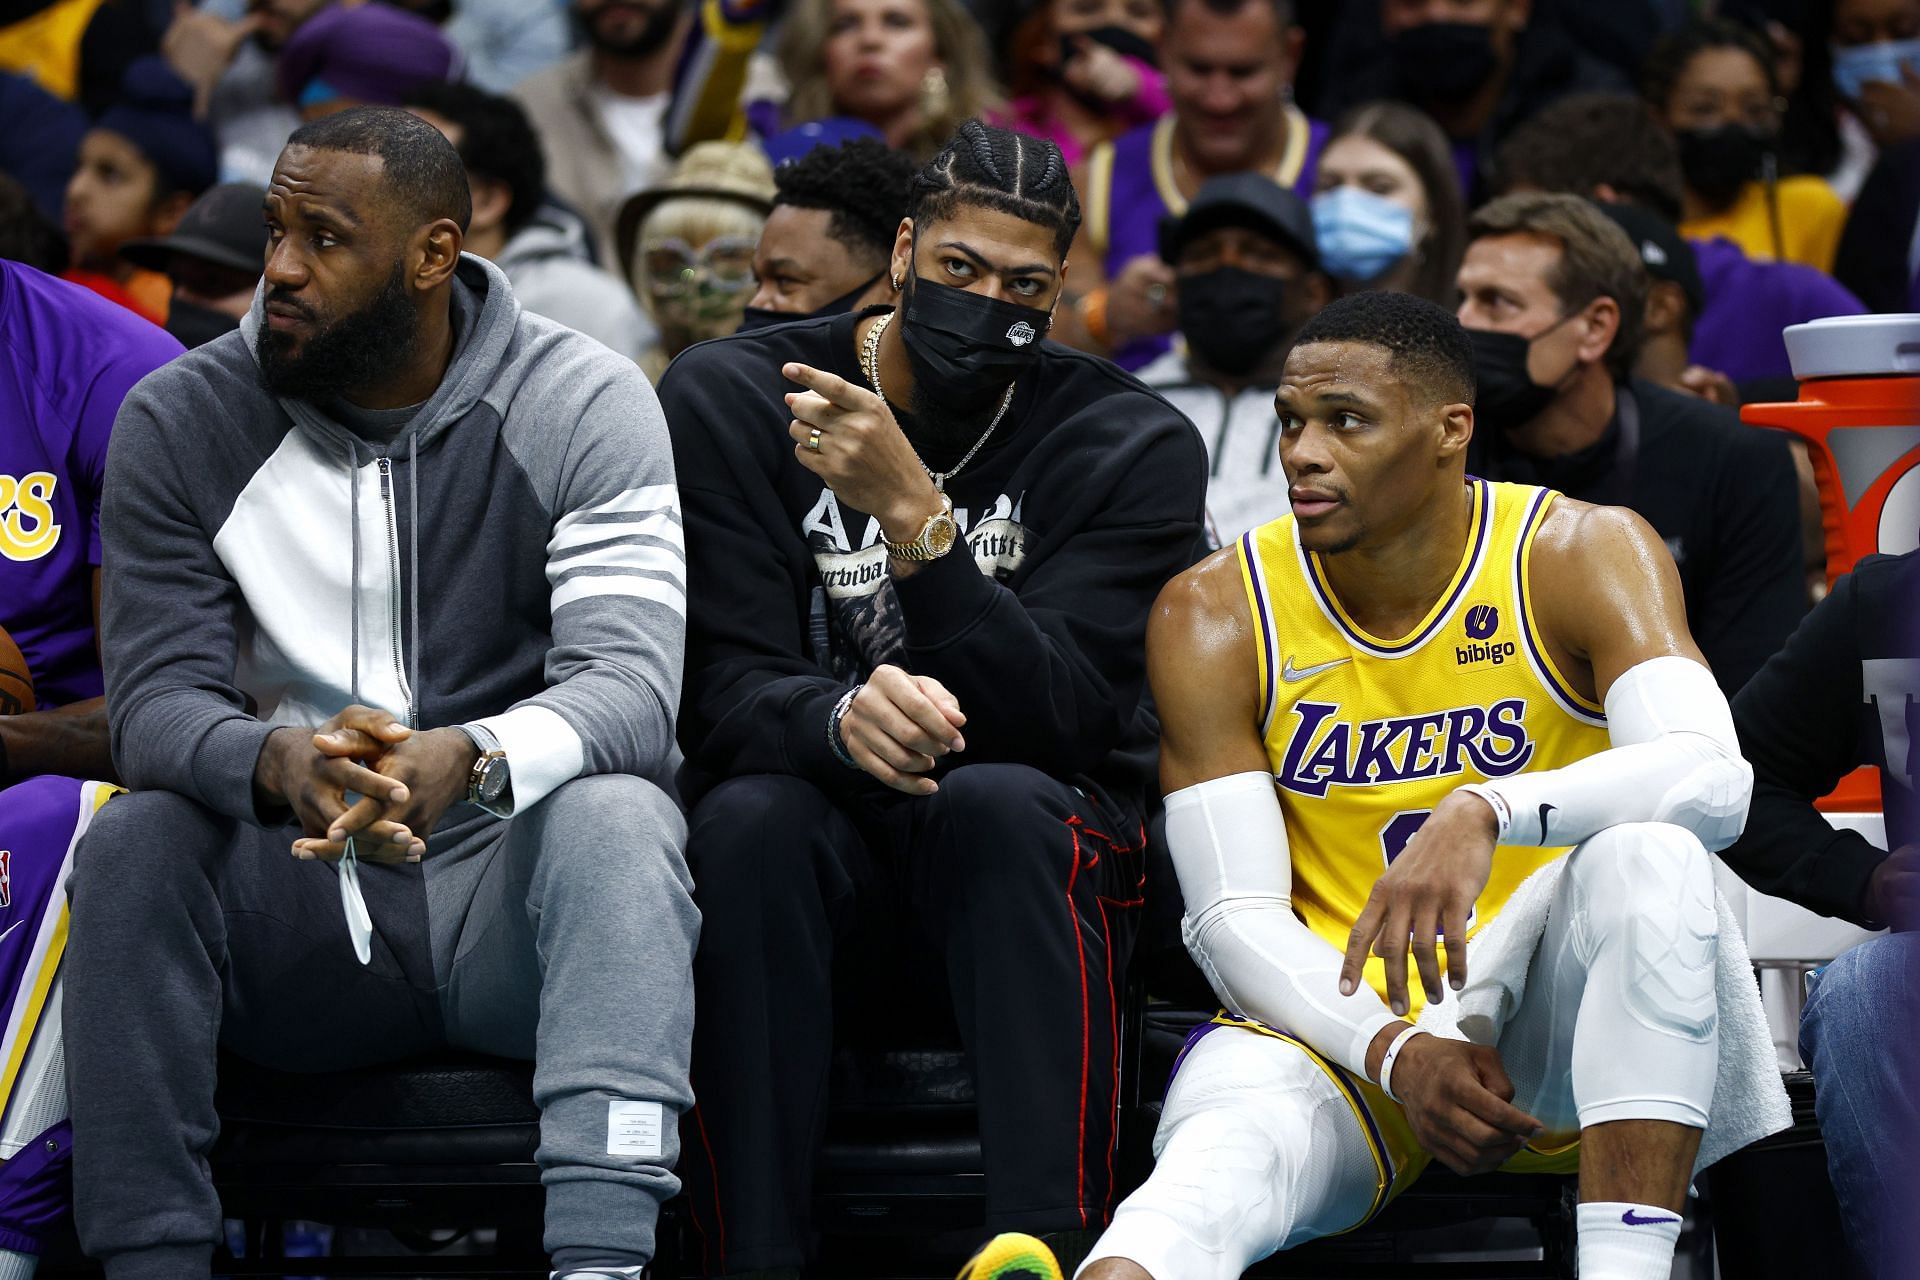 LeBron James on the bench with his teammates Anthony Davis and Russell Westbrook